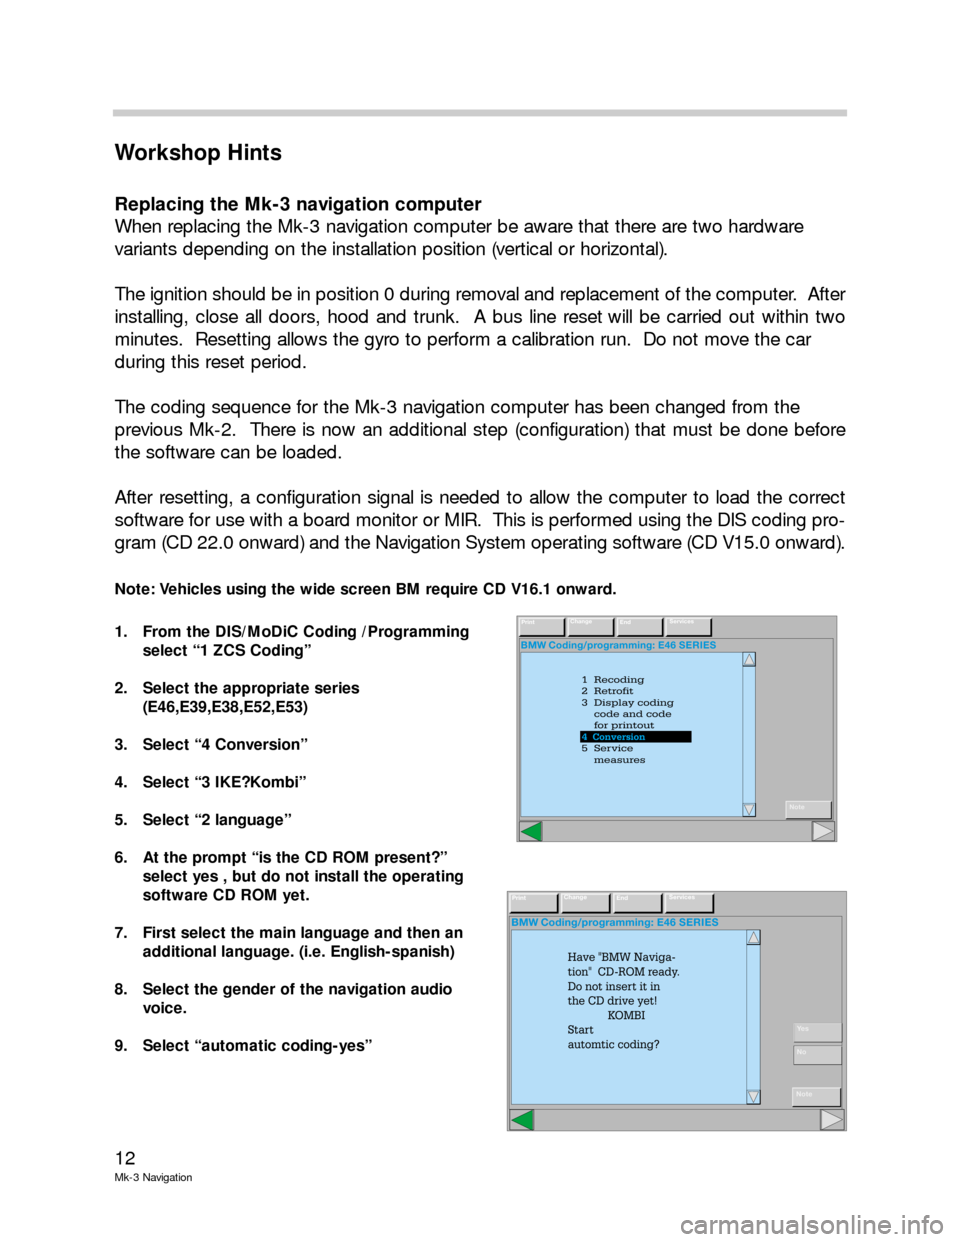 BMW 5 SERIES 2001 E39 Mk3 Navigation System Manual 12
Mk-3 Navigation
Workshop Hints
Replacing the Mk-3 navigation computer
When replacing the Mk-3 navigation computer be aware that there are two hardware 
variants depending on the installation positi